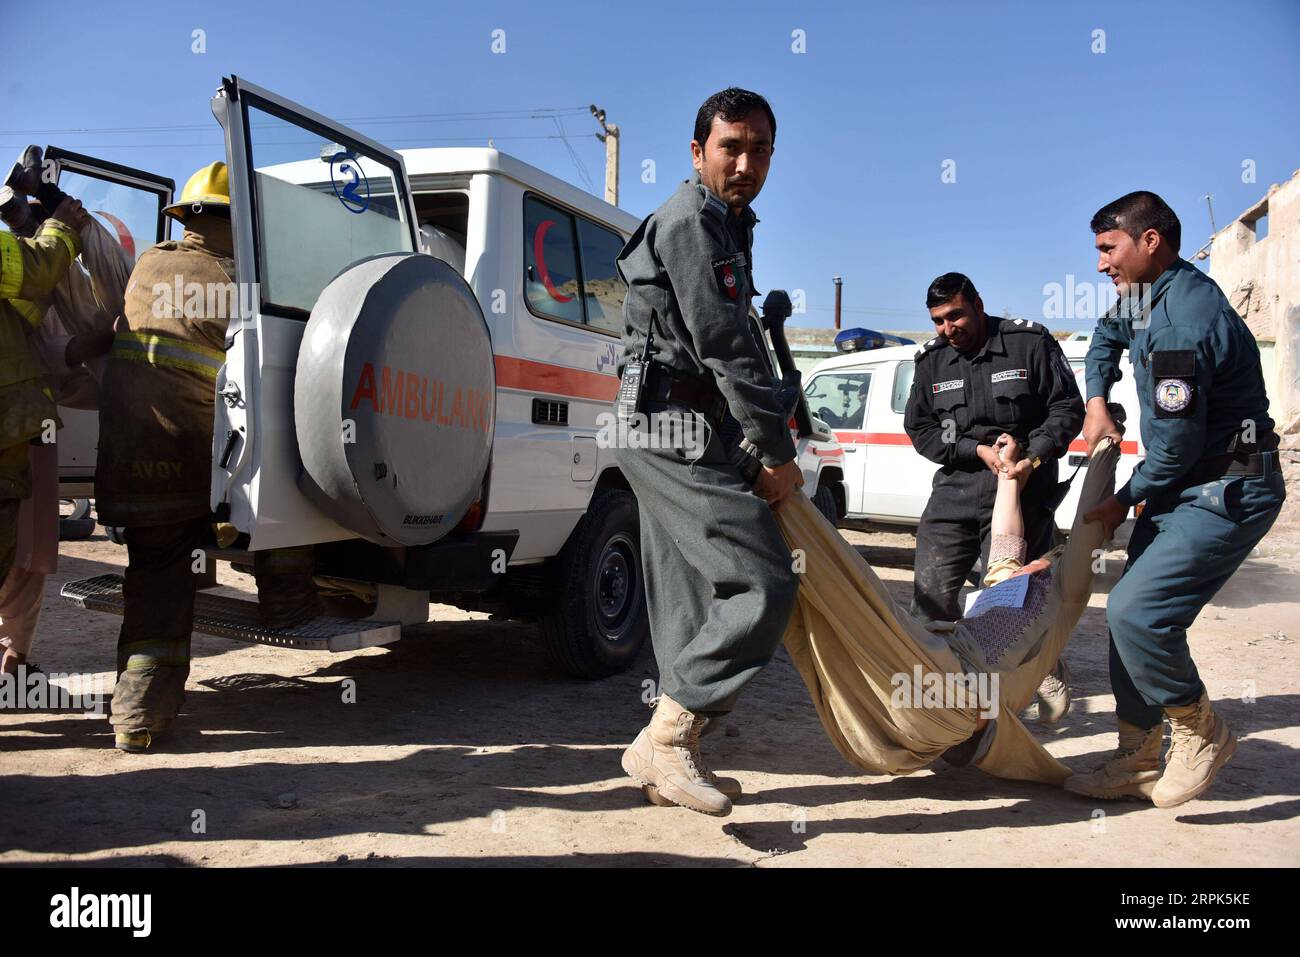 191230 -- KANDAHAR, Dec. 30, 2019 -- Afghan security force members attend a first-aid exercise at Mirwais Regional Hospital in Kandahar, Afghanistan, Dec. 29, 2019. Photo by /Xinhua AFGHANISTAN-KANDAHAR-FIRST-AID-EXERCISE SanaullahxSieam PUBLICATIONxNOTxINxCHN Stock Photo